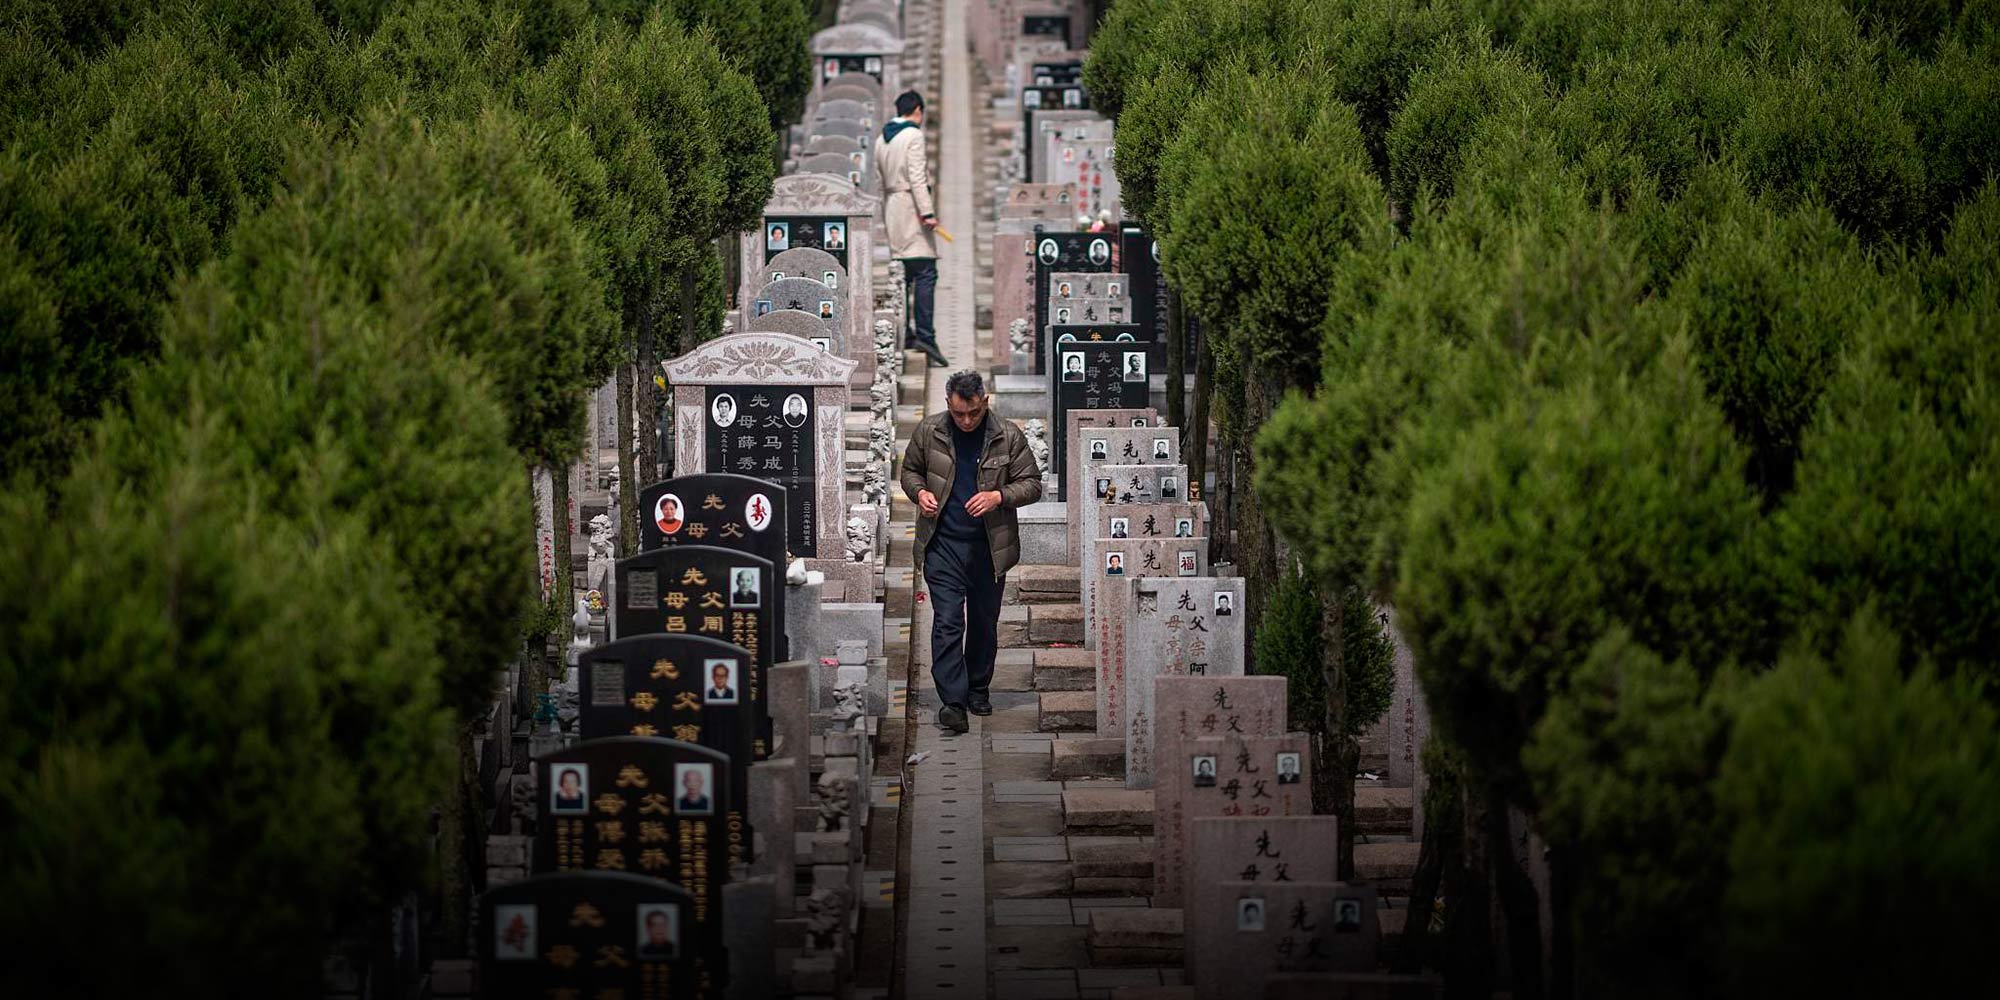 To Religious Chinese, Cemeteries Are of Grave Importance